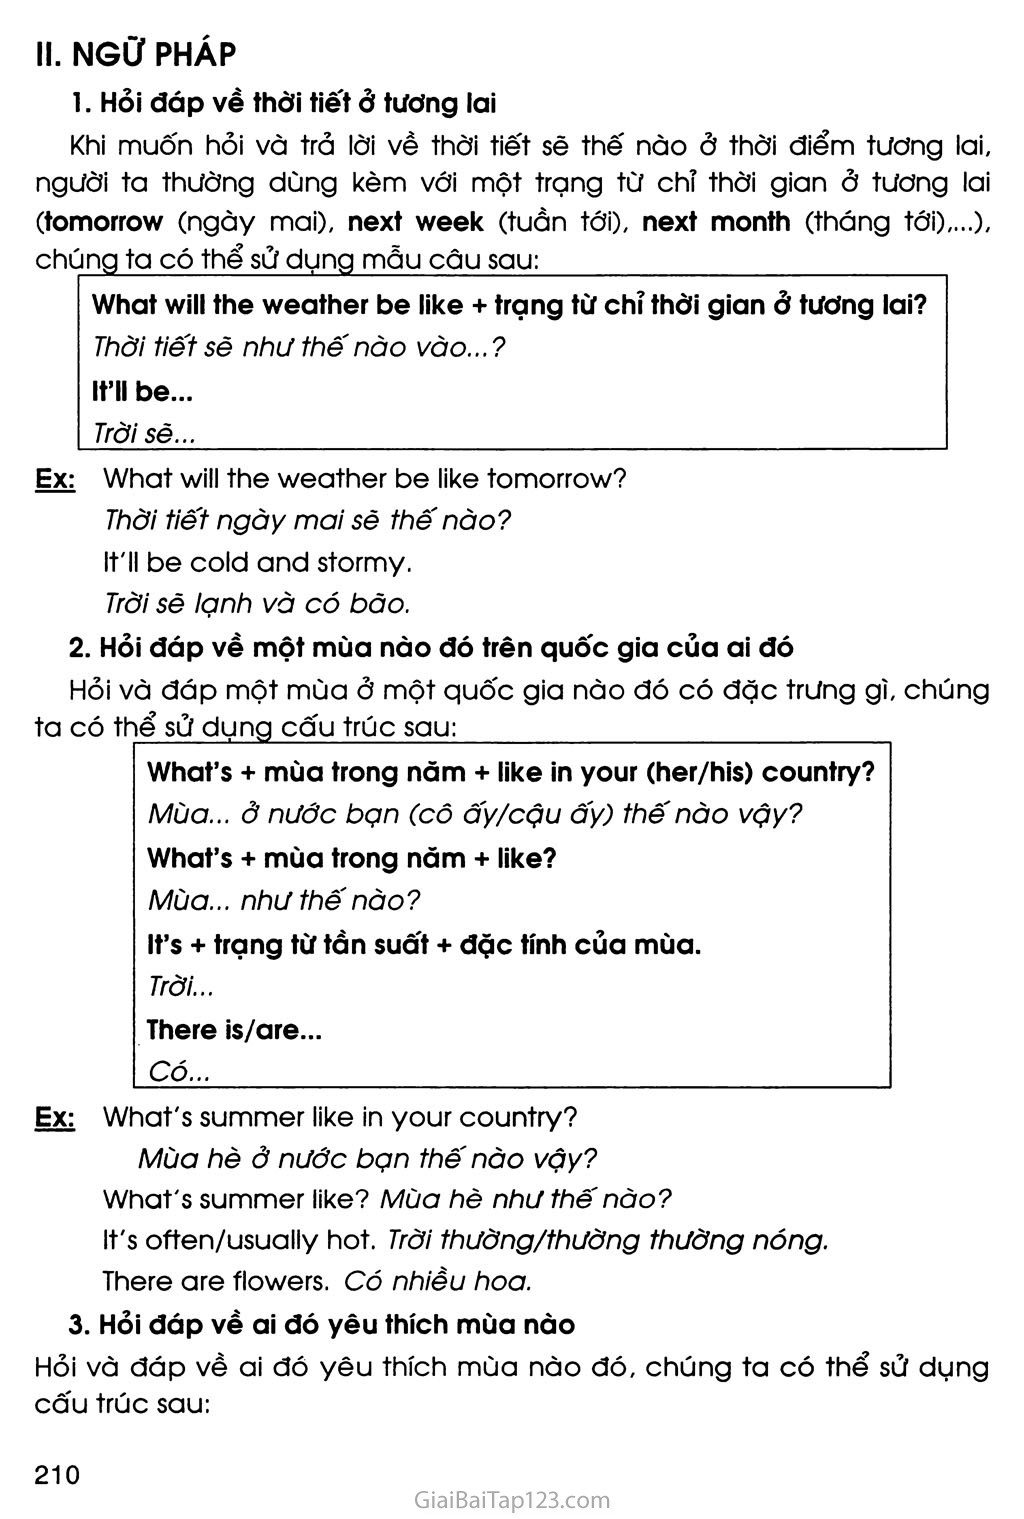 UNIT 18: WHAT WILL THE WEATHER BE LIKE TOMORROW? trang 2